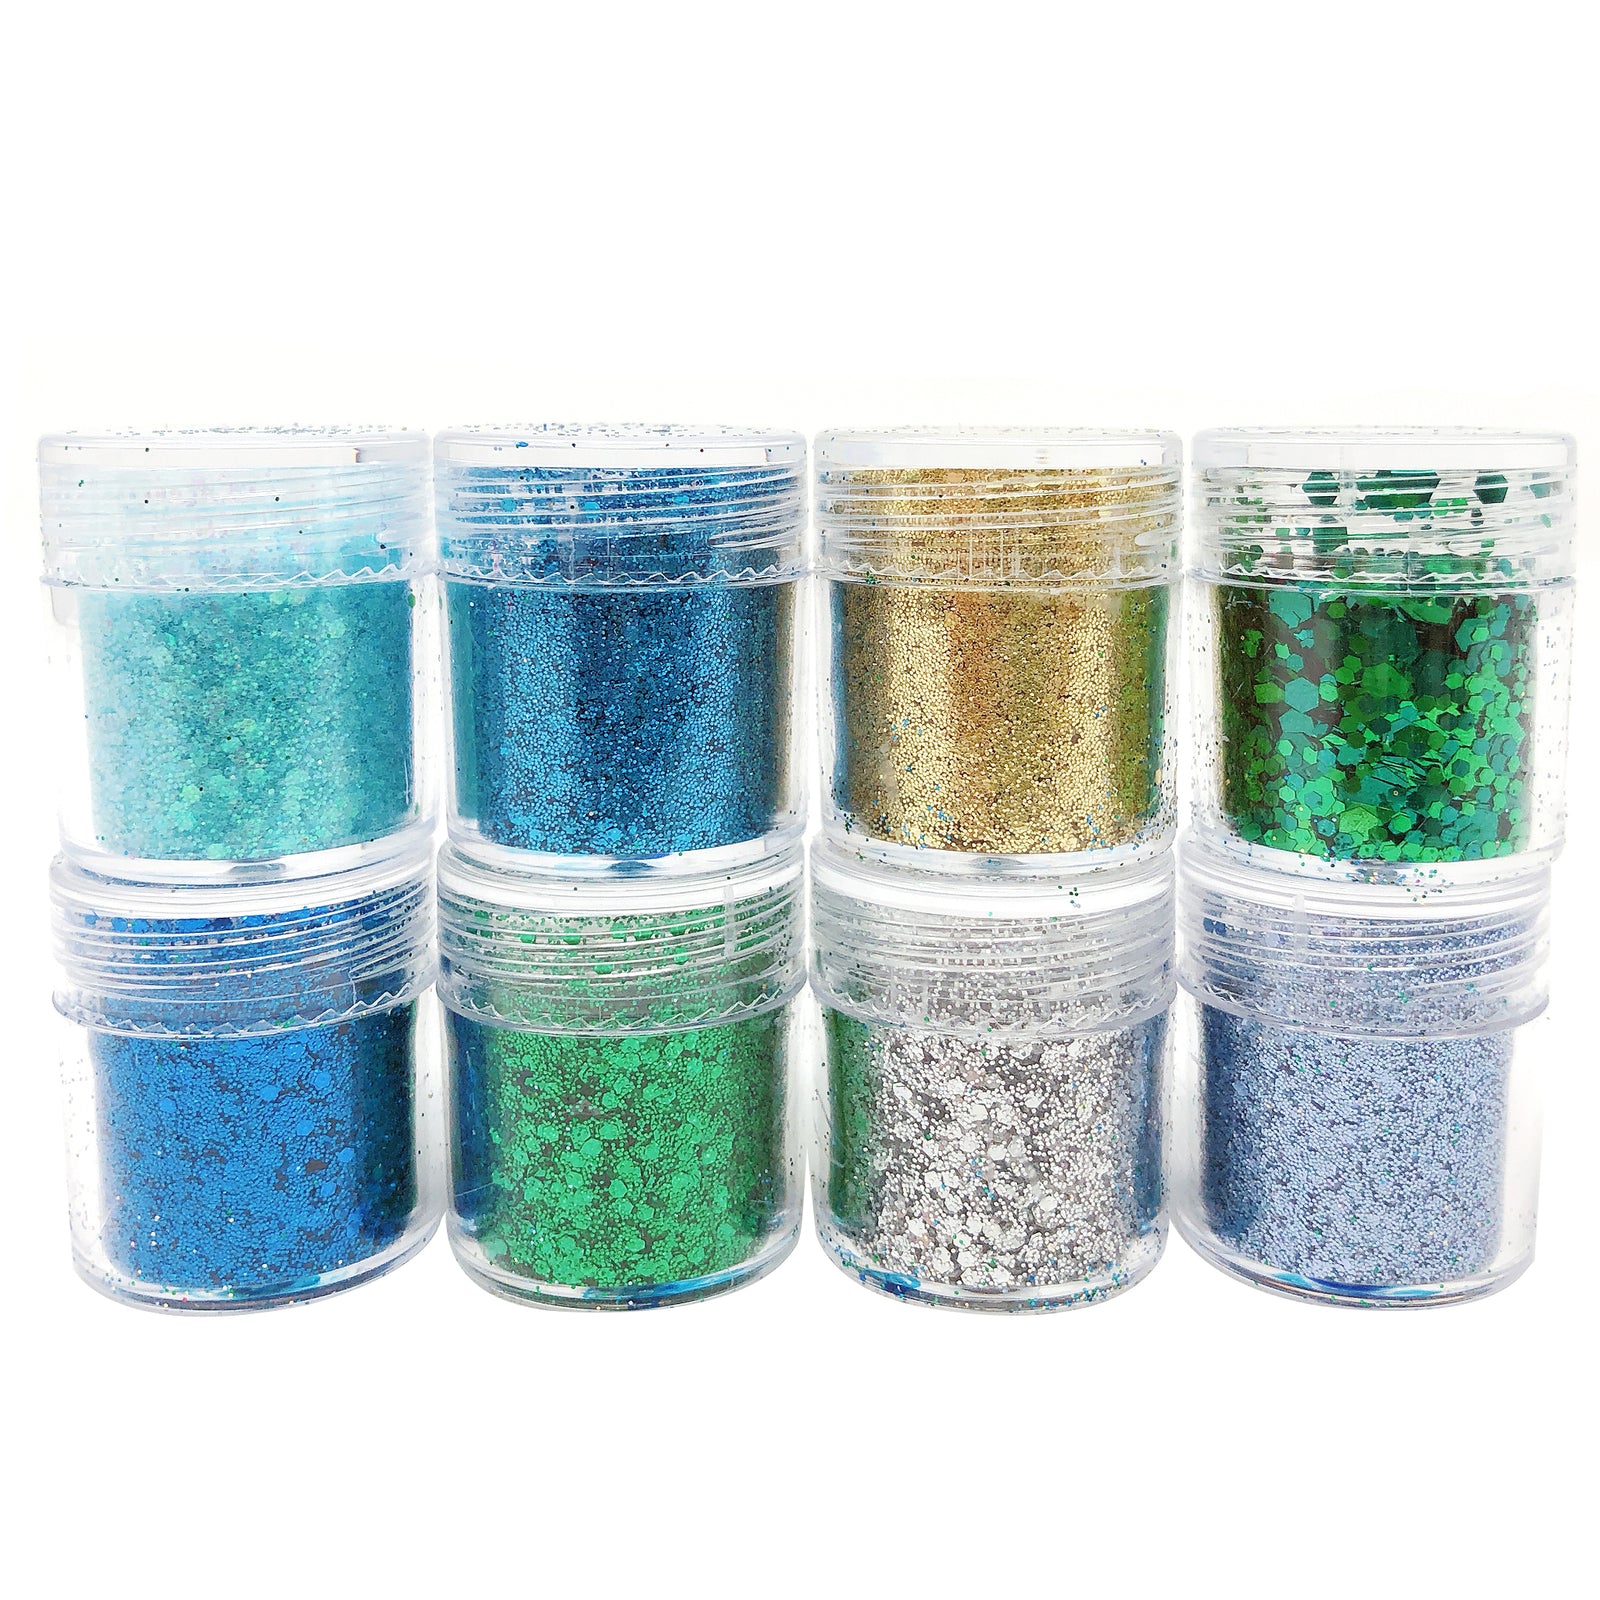 Wrapables Chunky Glitter for Hair Face Makeup Nail Art Decoration (8 Colors), Gold & Silver